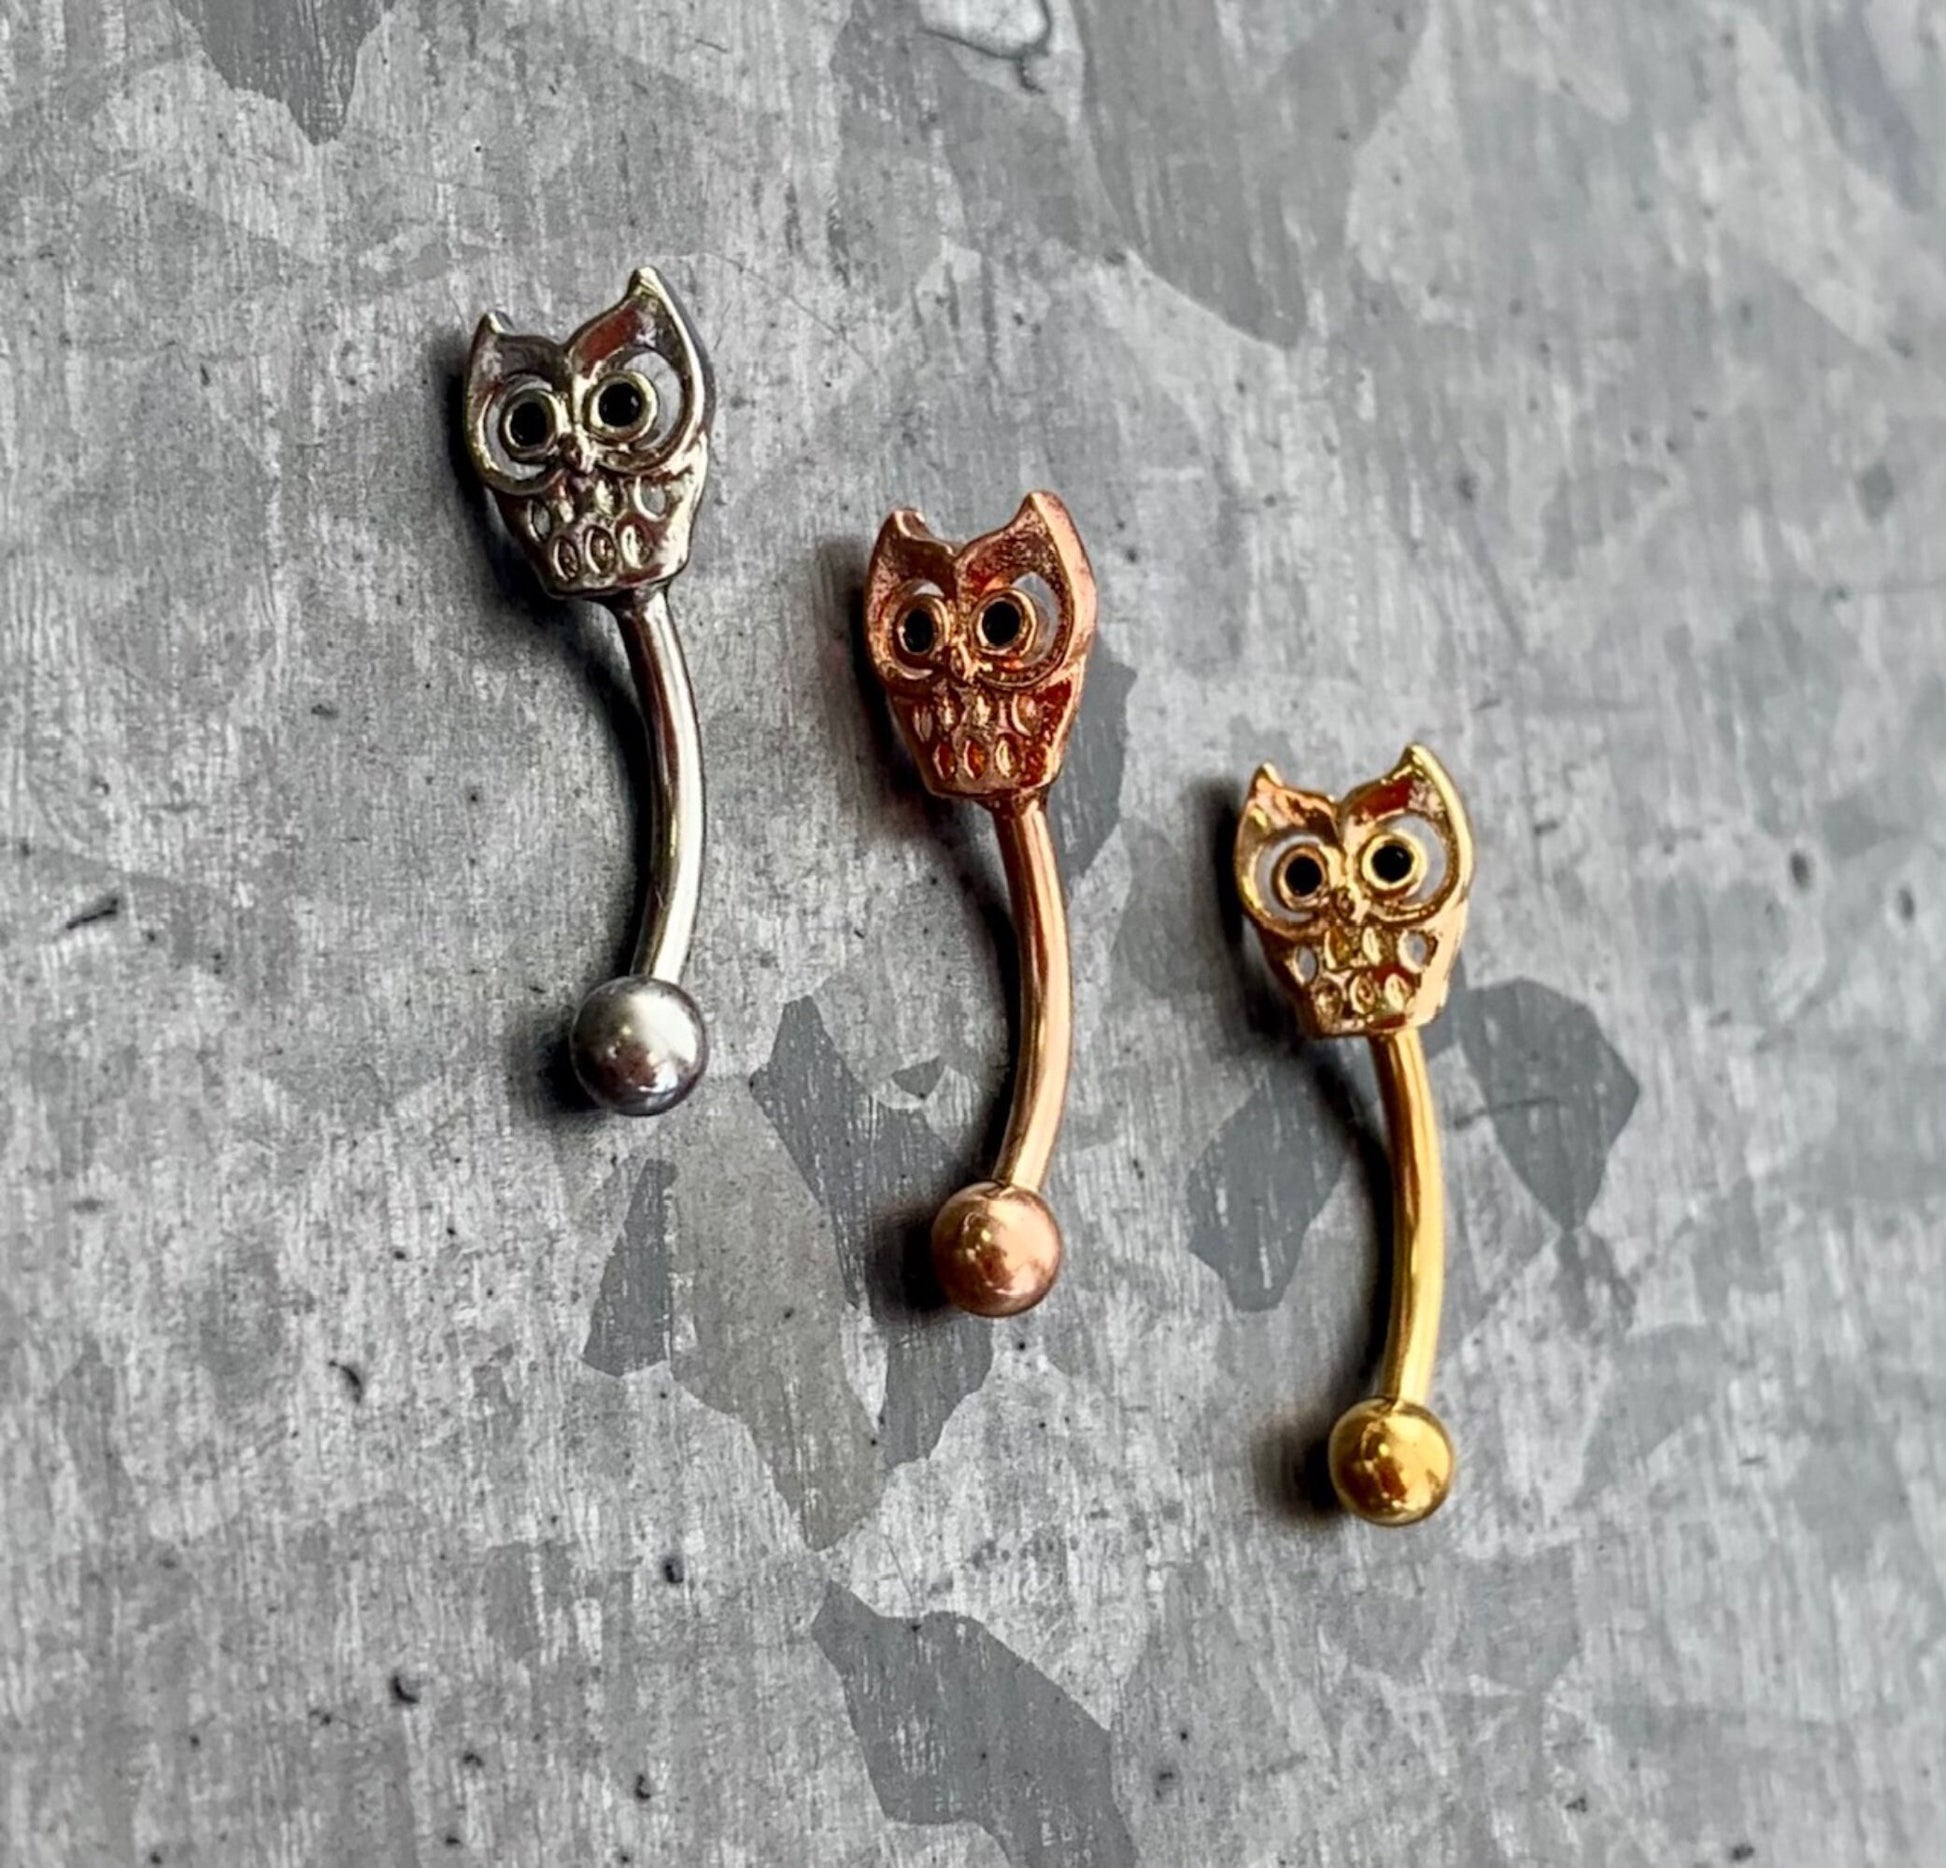 1 Owl Surgical Steel Eyebrow Ring with Curved Barbell - 16g (1.2mm), length 5/16" (8mm), Ball 3mm - Silver, Gold or Rose Gold available!